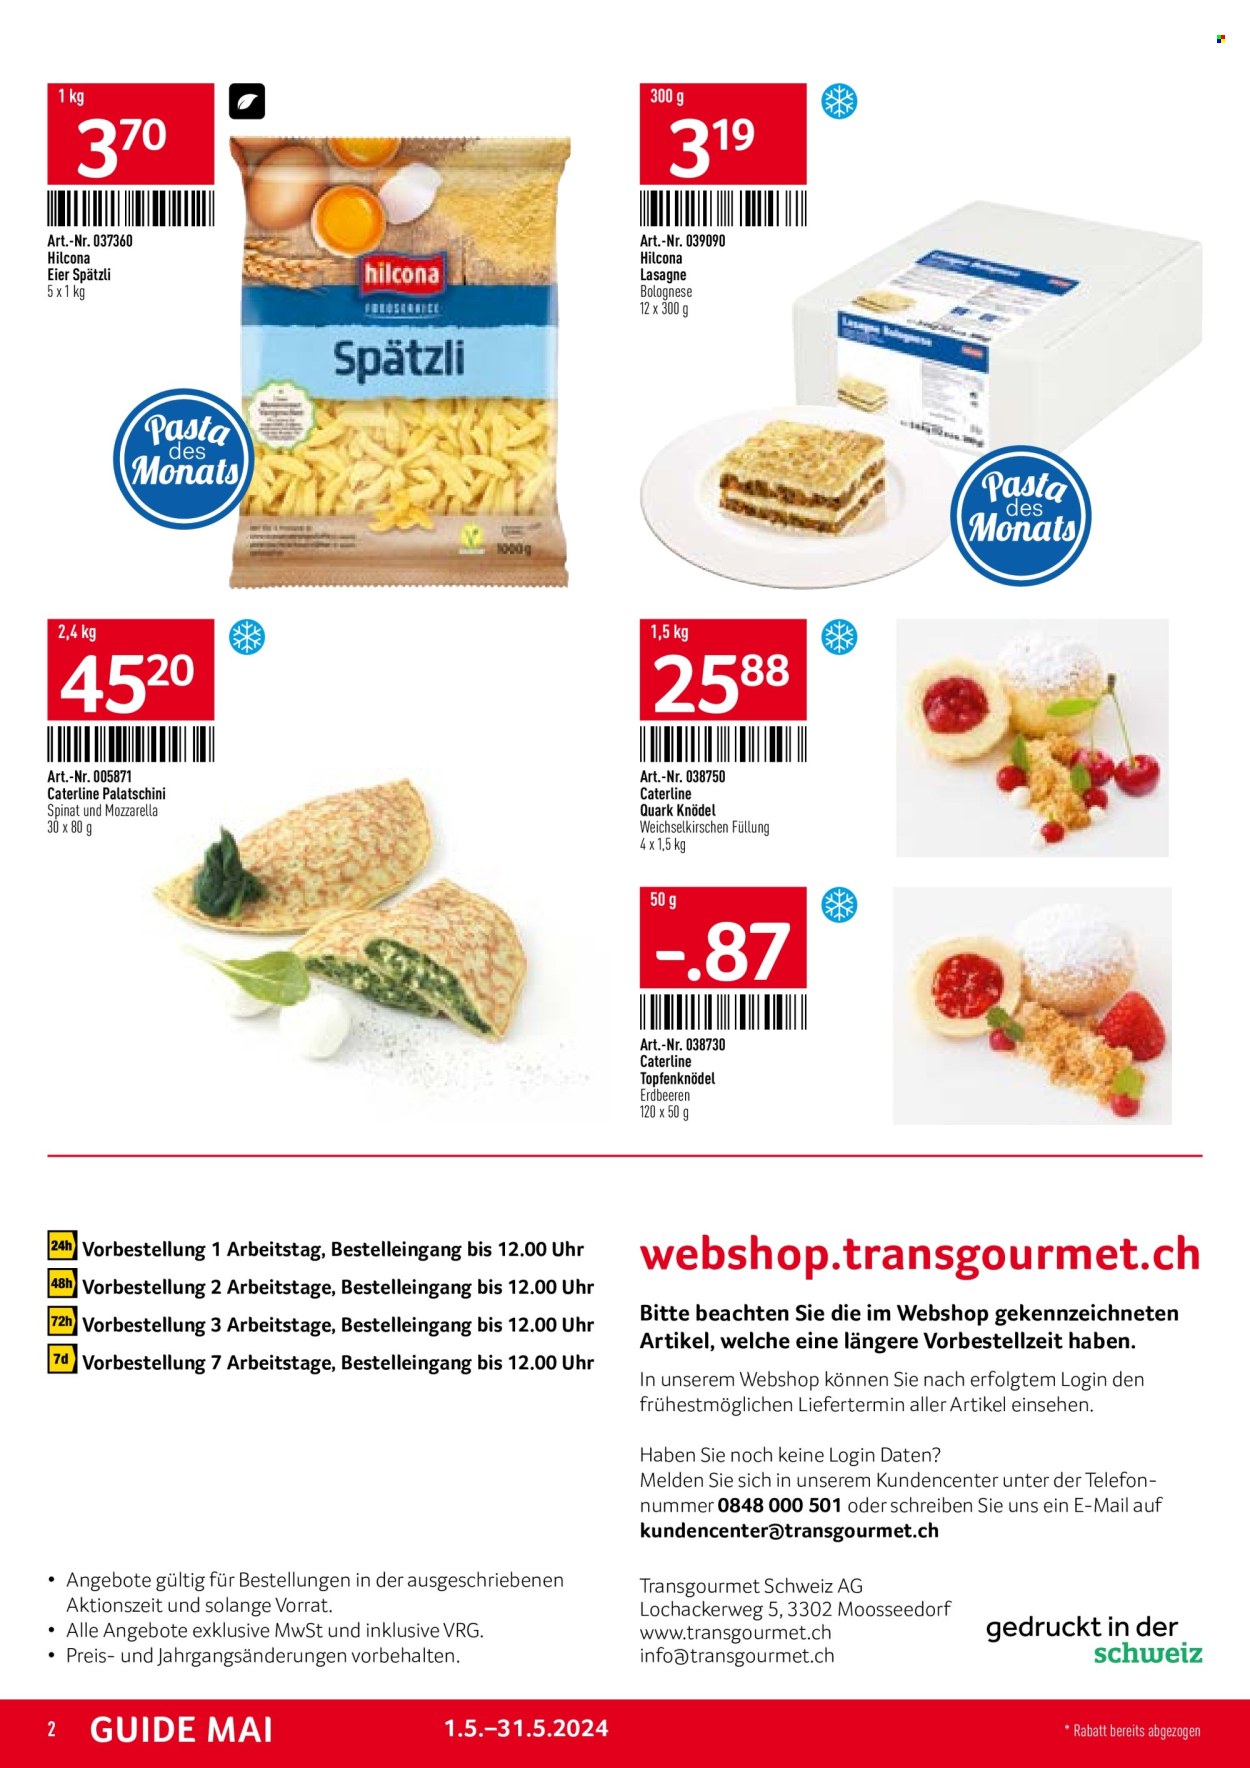 Catalogue TransGourmet - 1.5.2024 - 31.5.2024. Page 2.